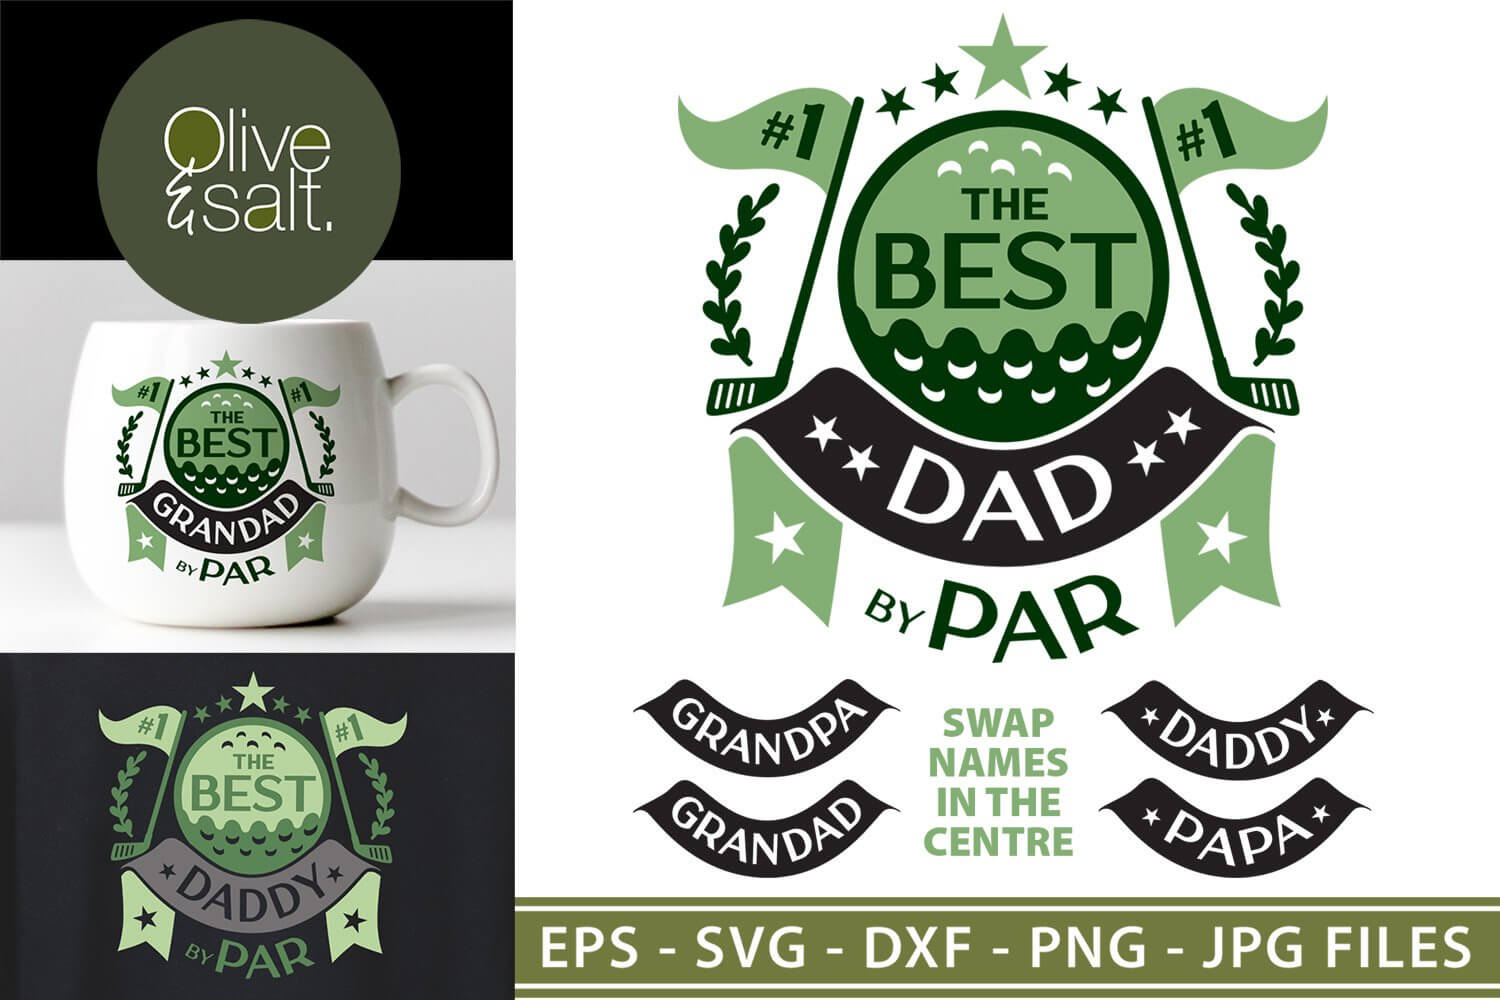 "The Best Dad by Par" logo on a white background and white cup merch on a white background.